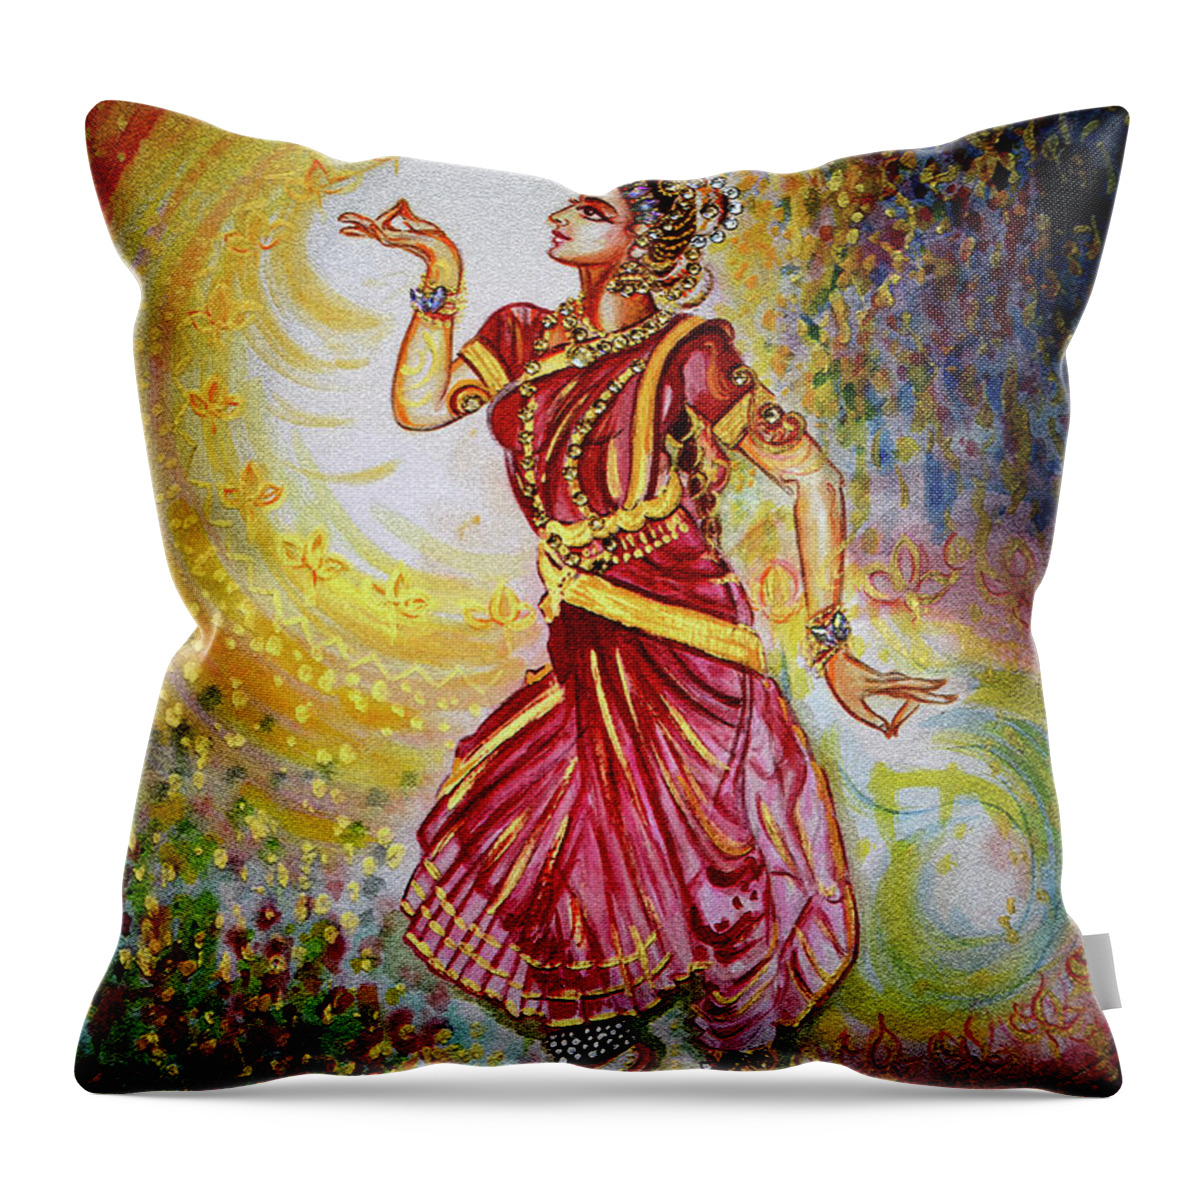 Dance Throw Pillow featuring the painting Dance by Harsh Malik